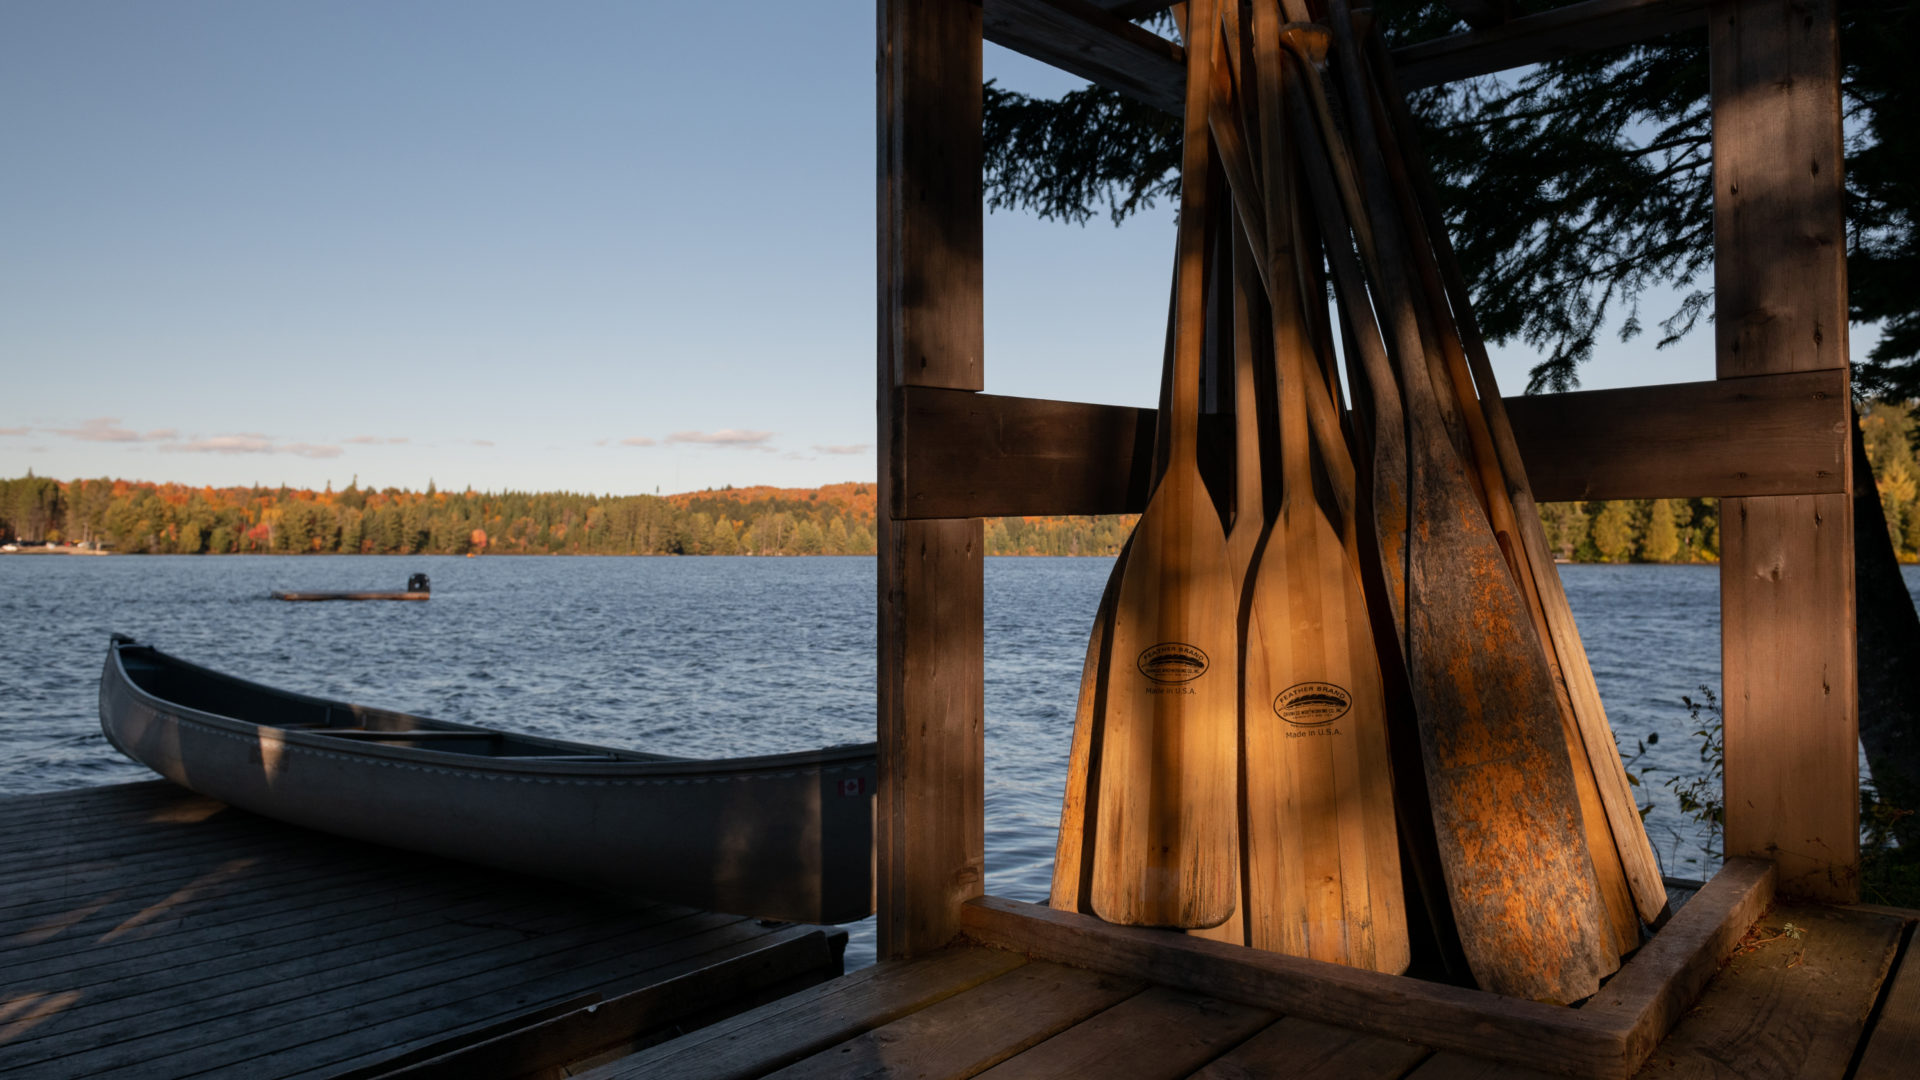 group of canoe paddles leaning on a wooden fence next to a lake with canoe in the late afternoon